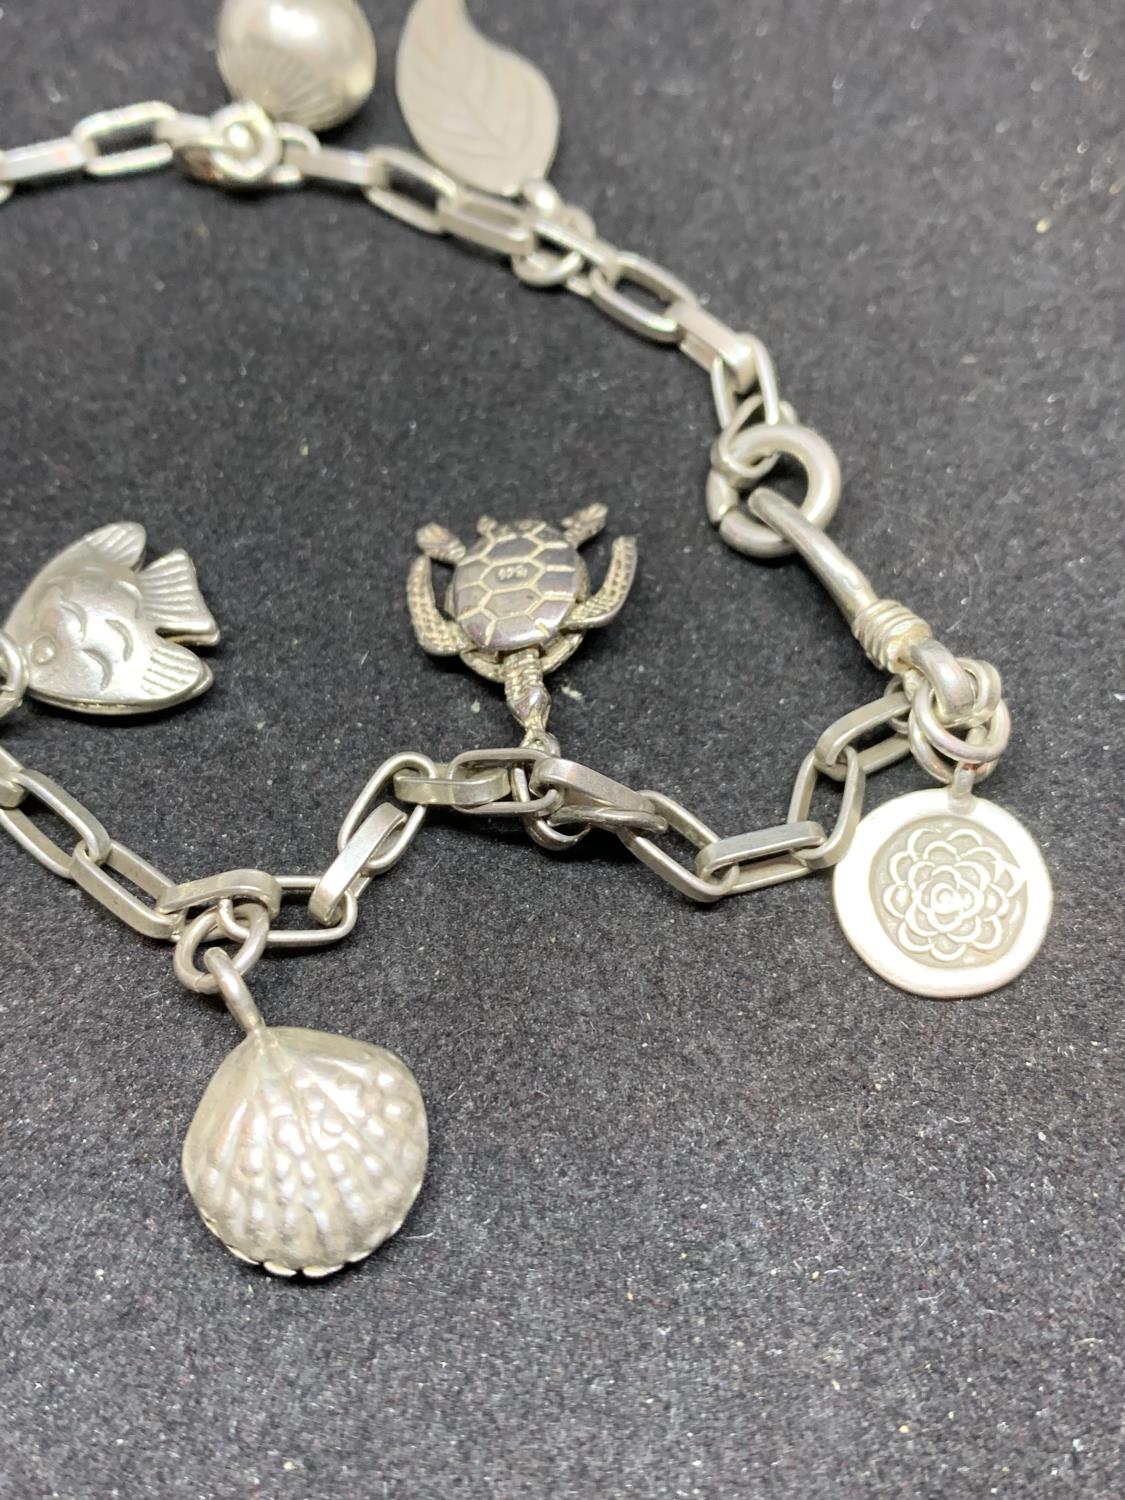 A SILVER CHARM BRACELET WITH NINE CHARMS TO INCLUDE CLOGS, FEATHERS, TURTLE, FISH, SHELL ETC - Image 4 of 4